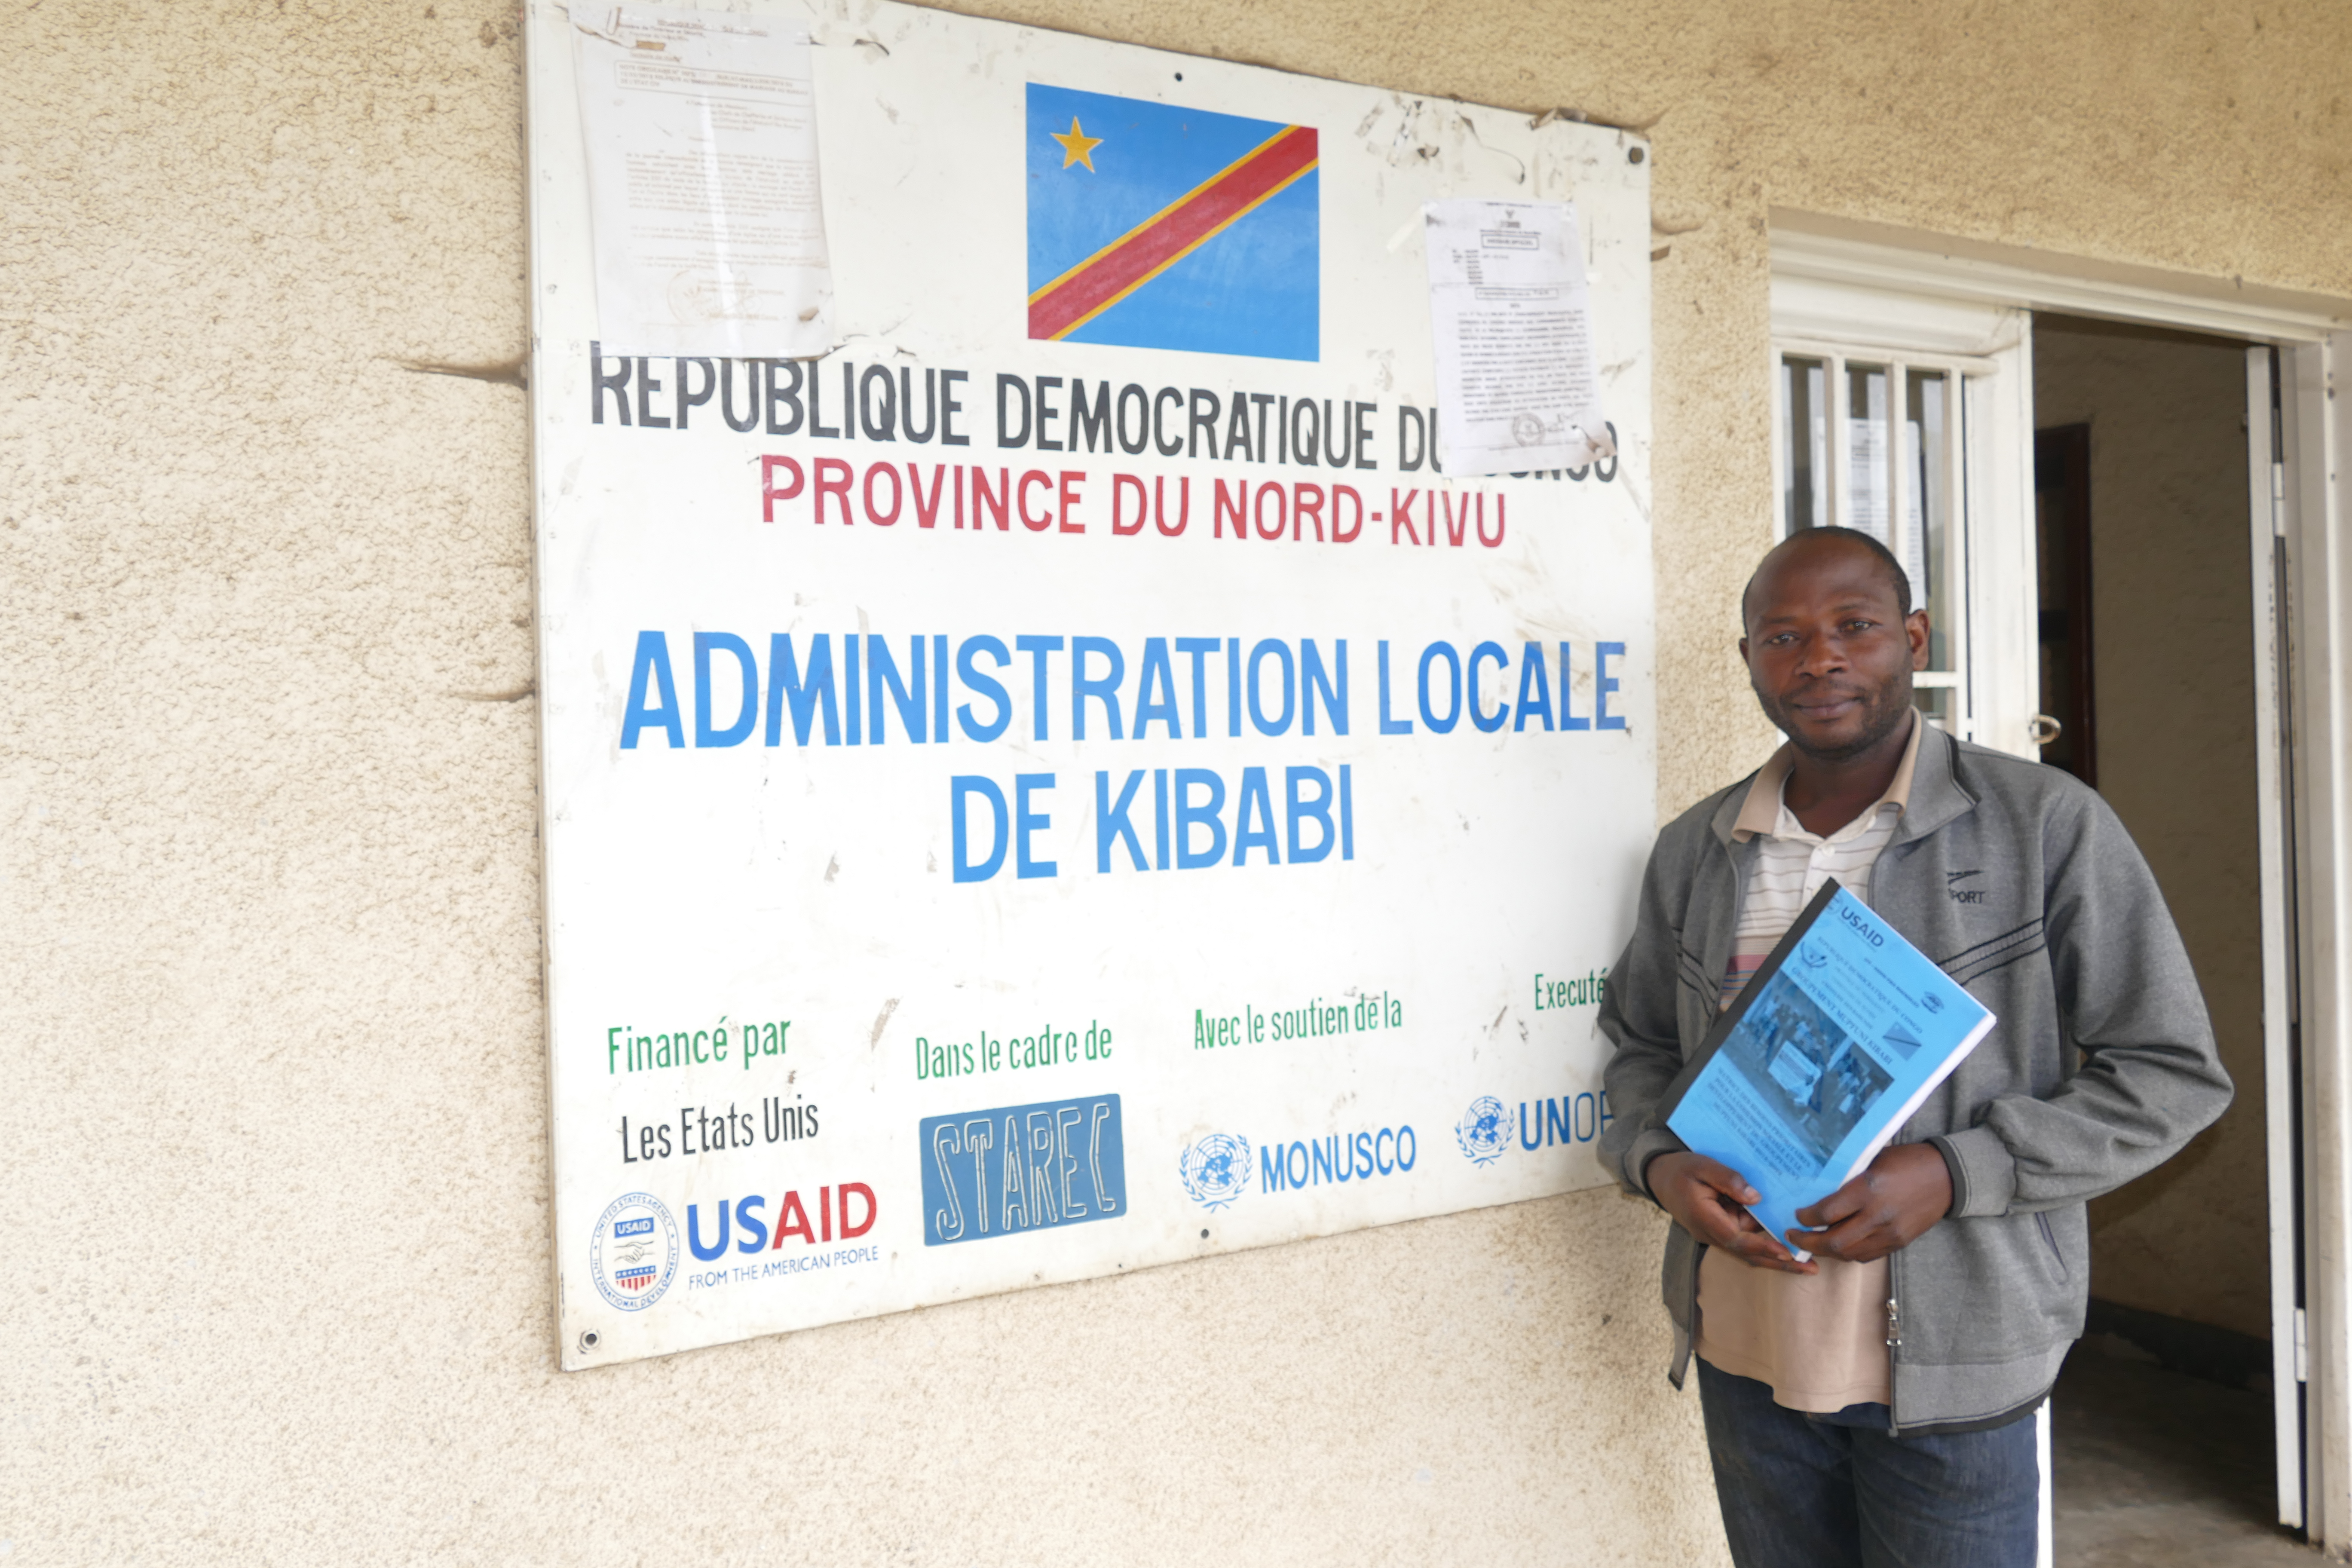 Man holds USAID manual in front of USAID banner